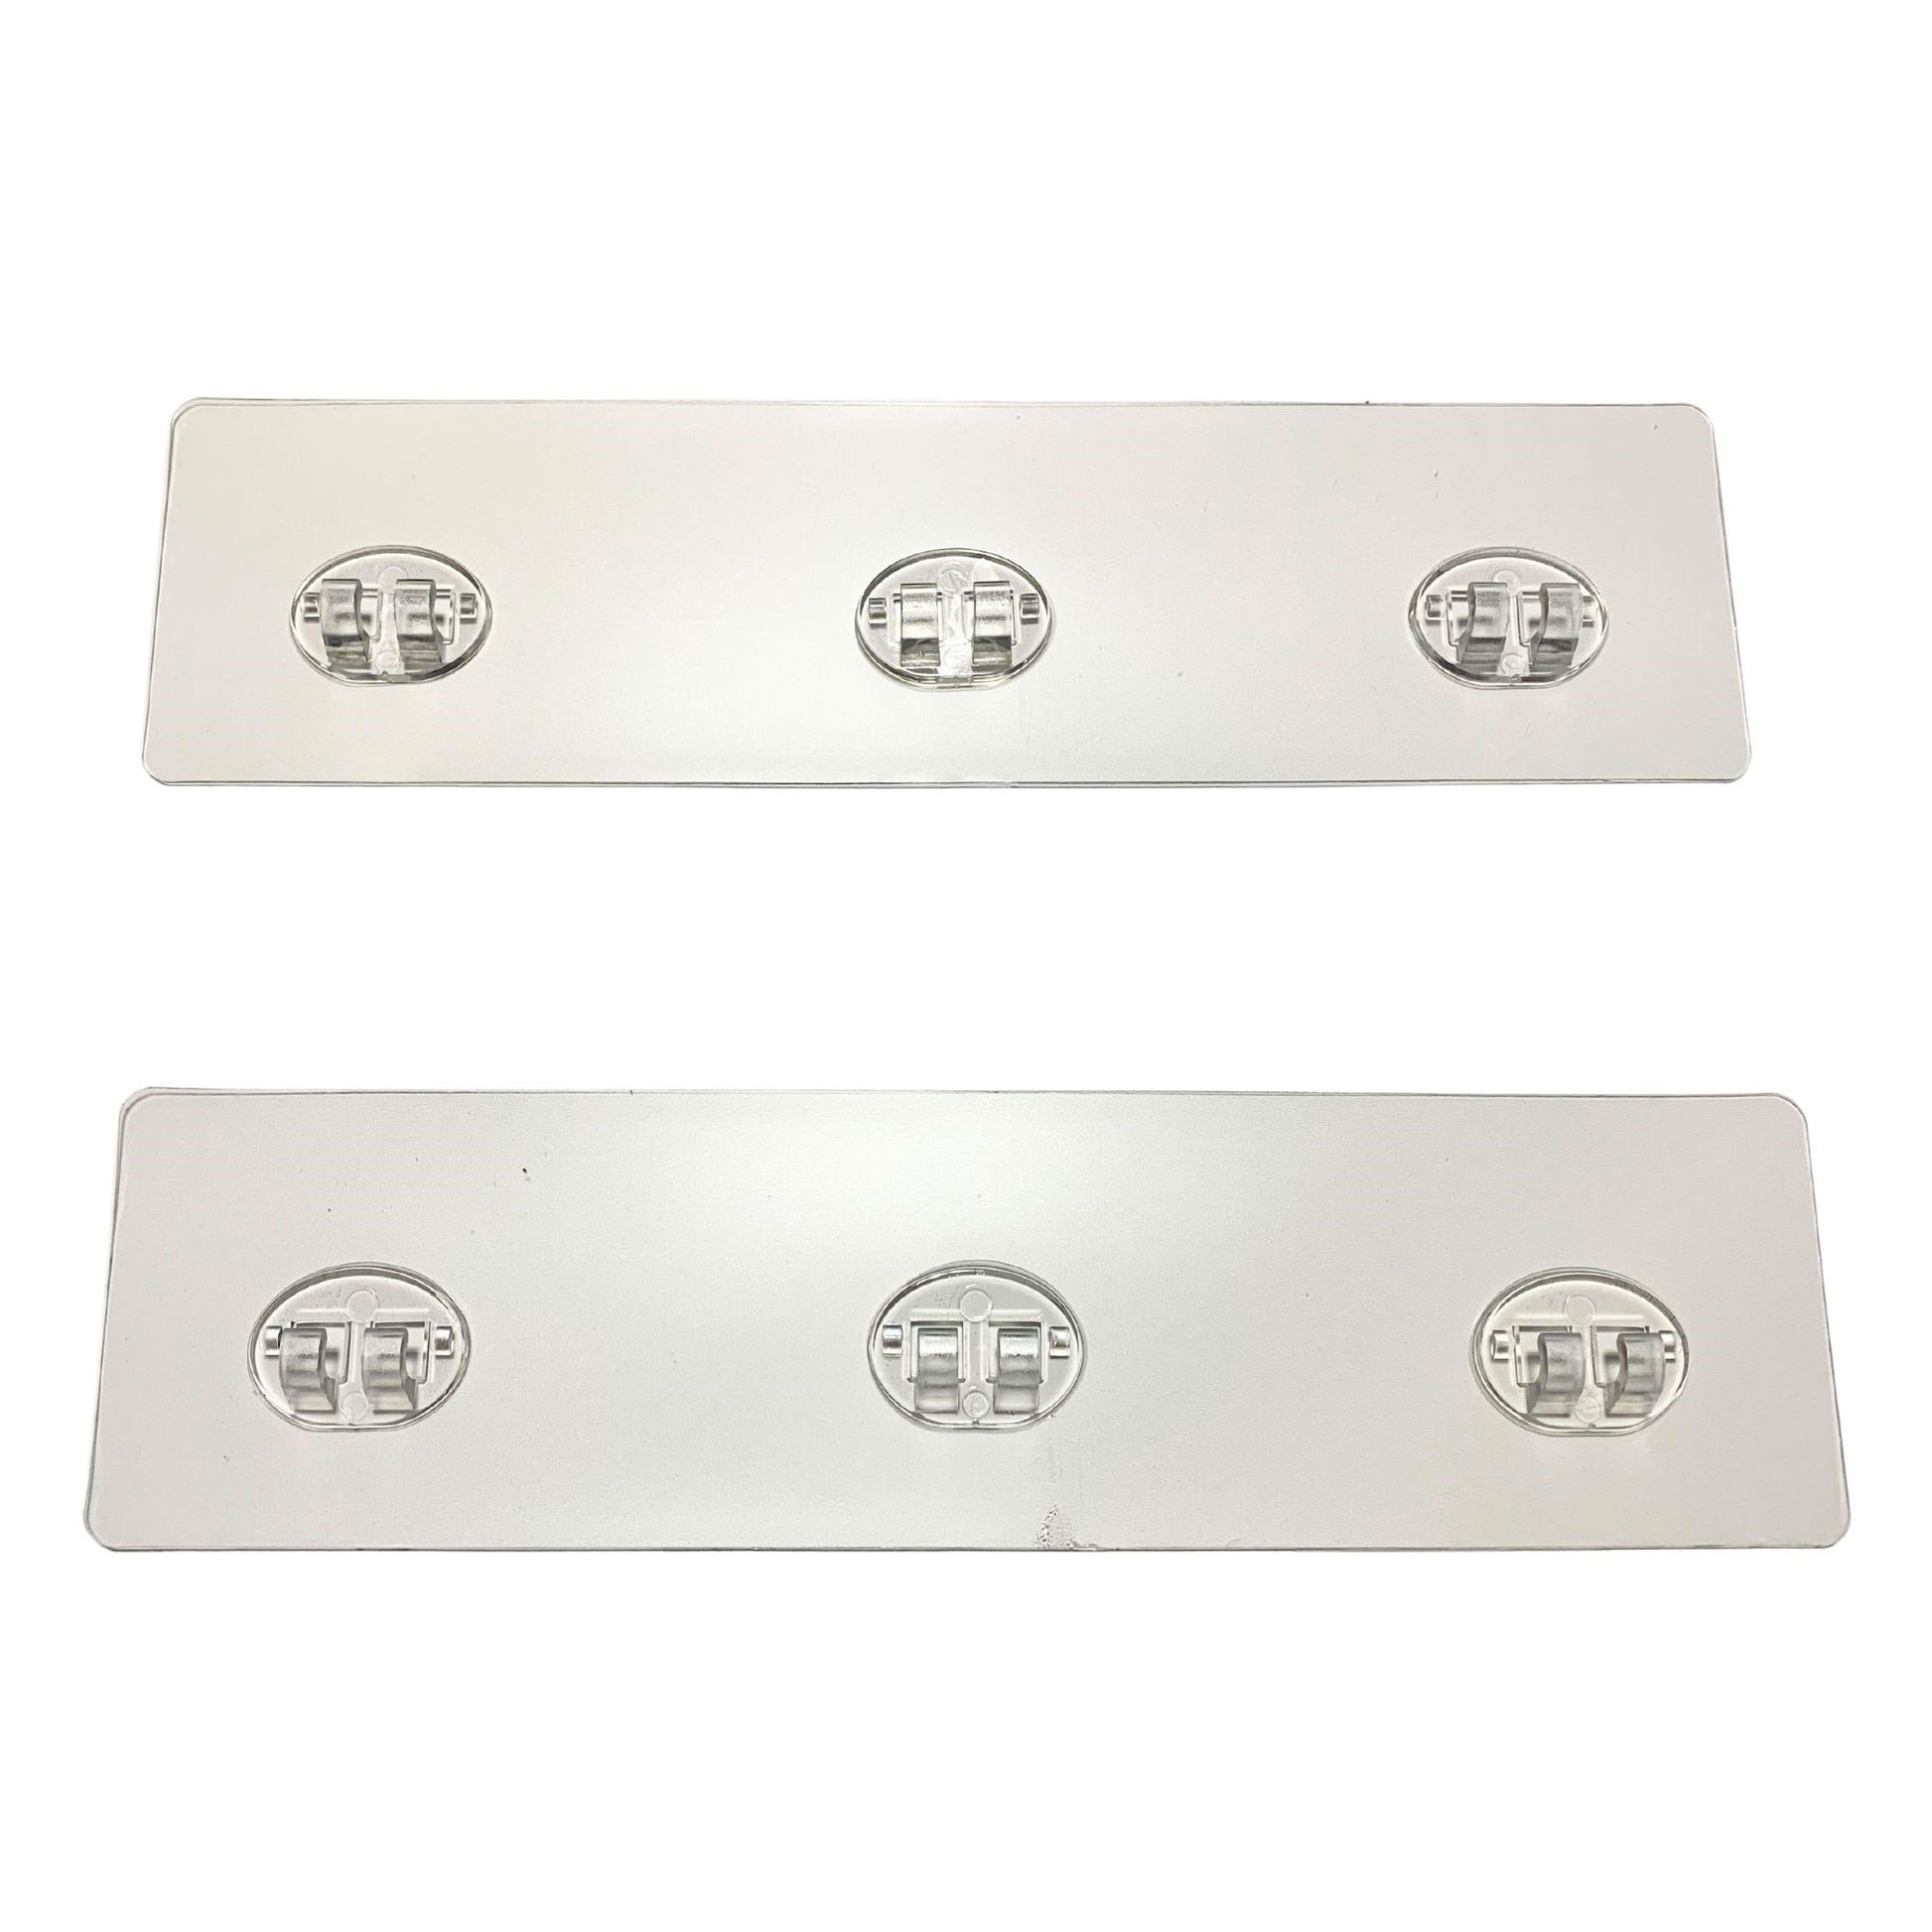 2 Replacement Adhesive Strips for Shower Caddies